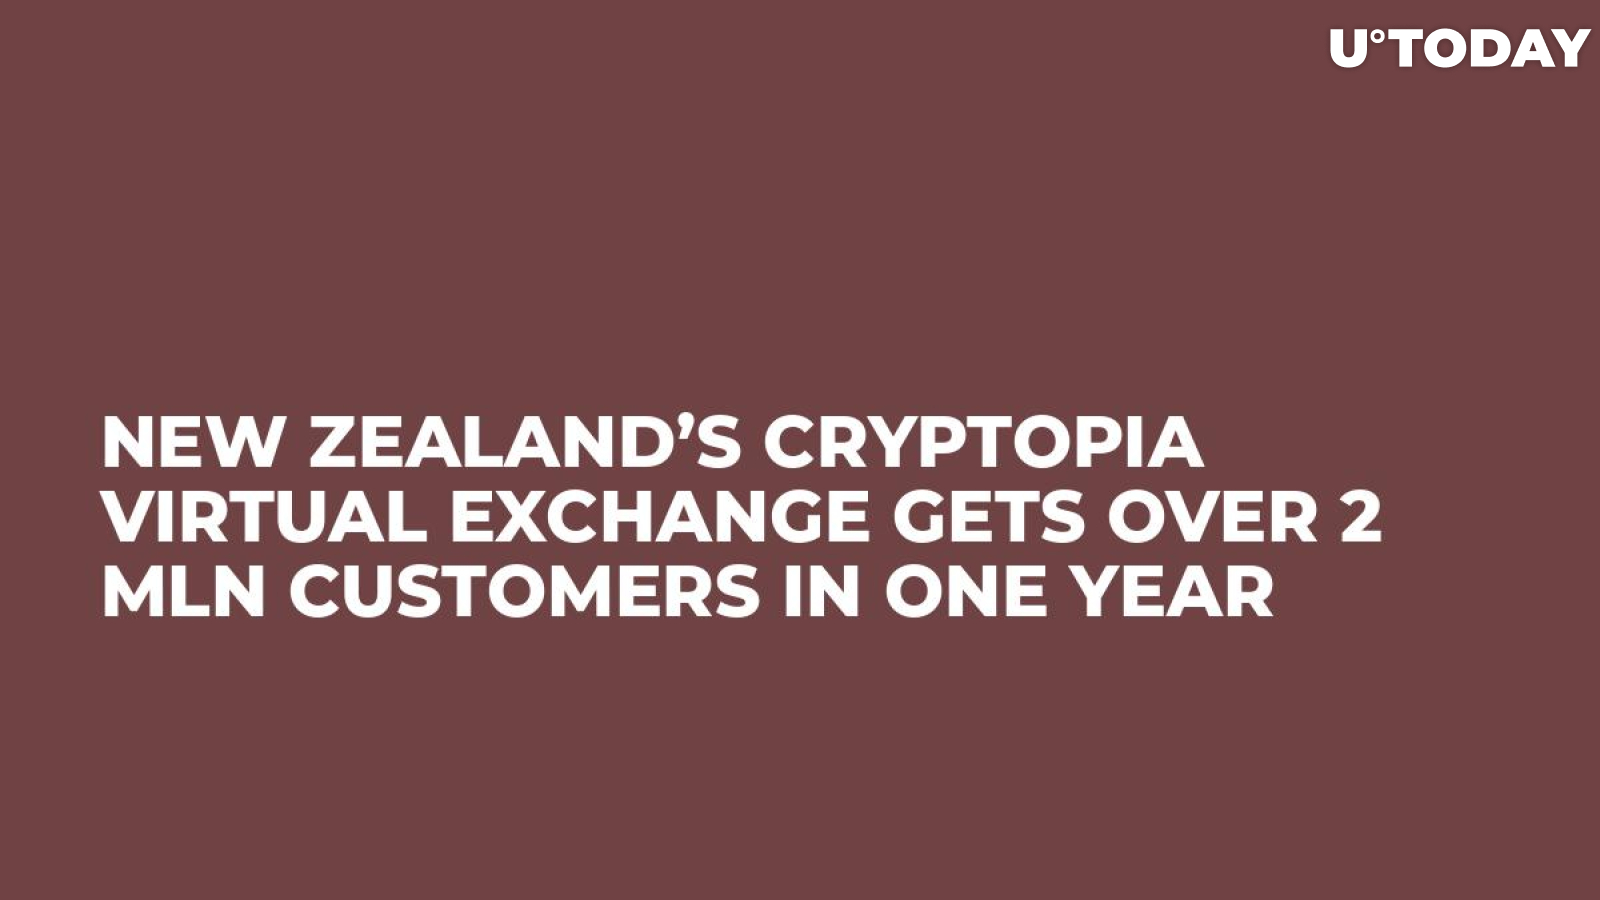 New Zealand’s Cryptopia Virtual Exchange Gets Over 2 Mln Customers in One Year